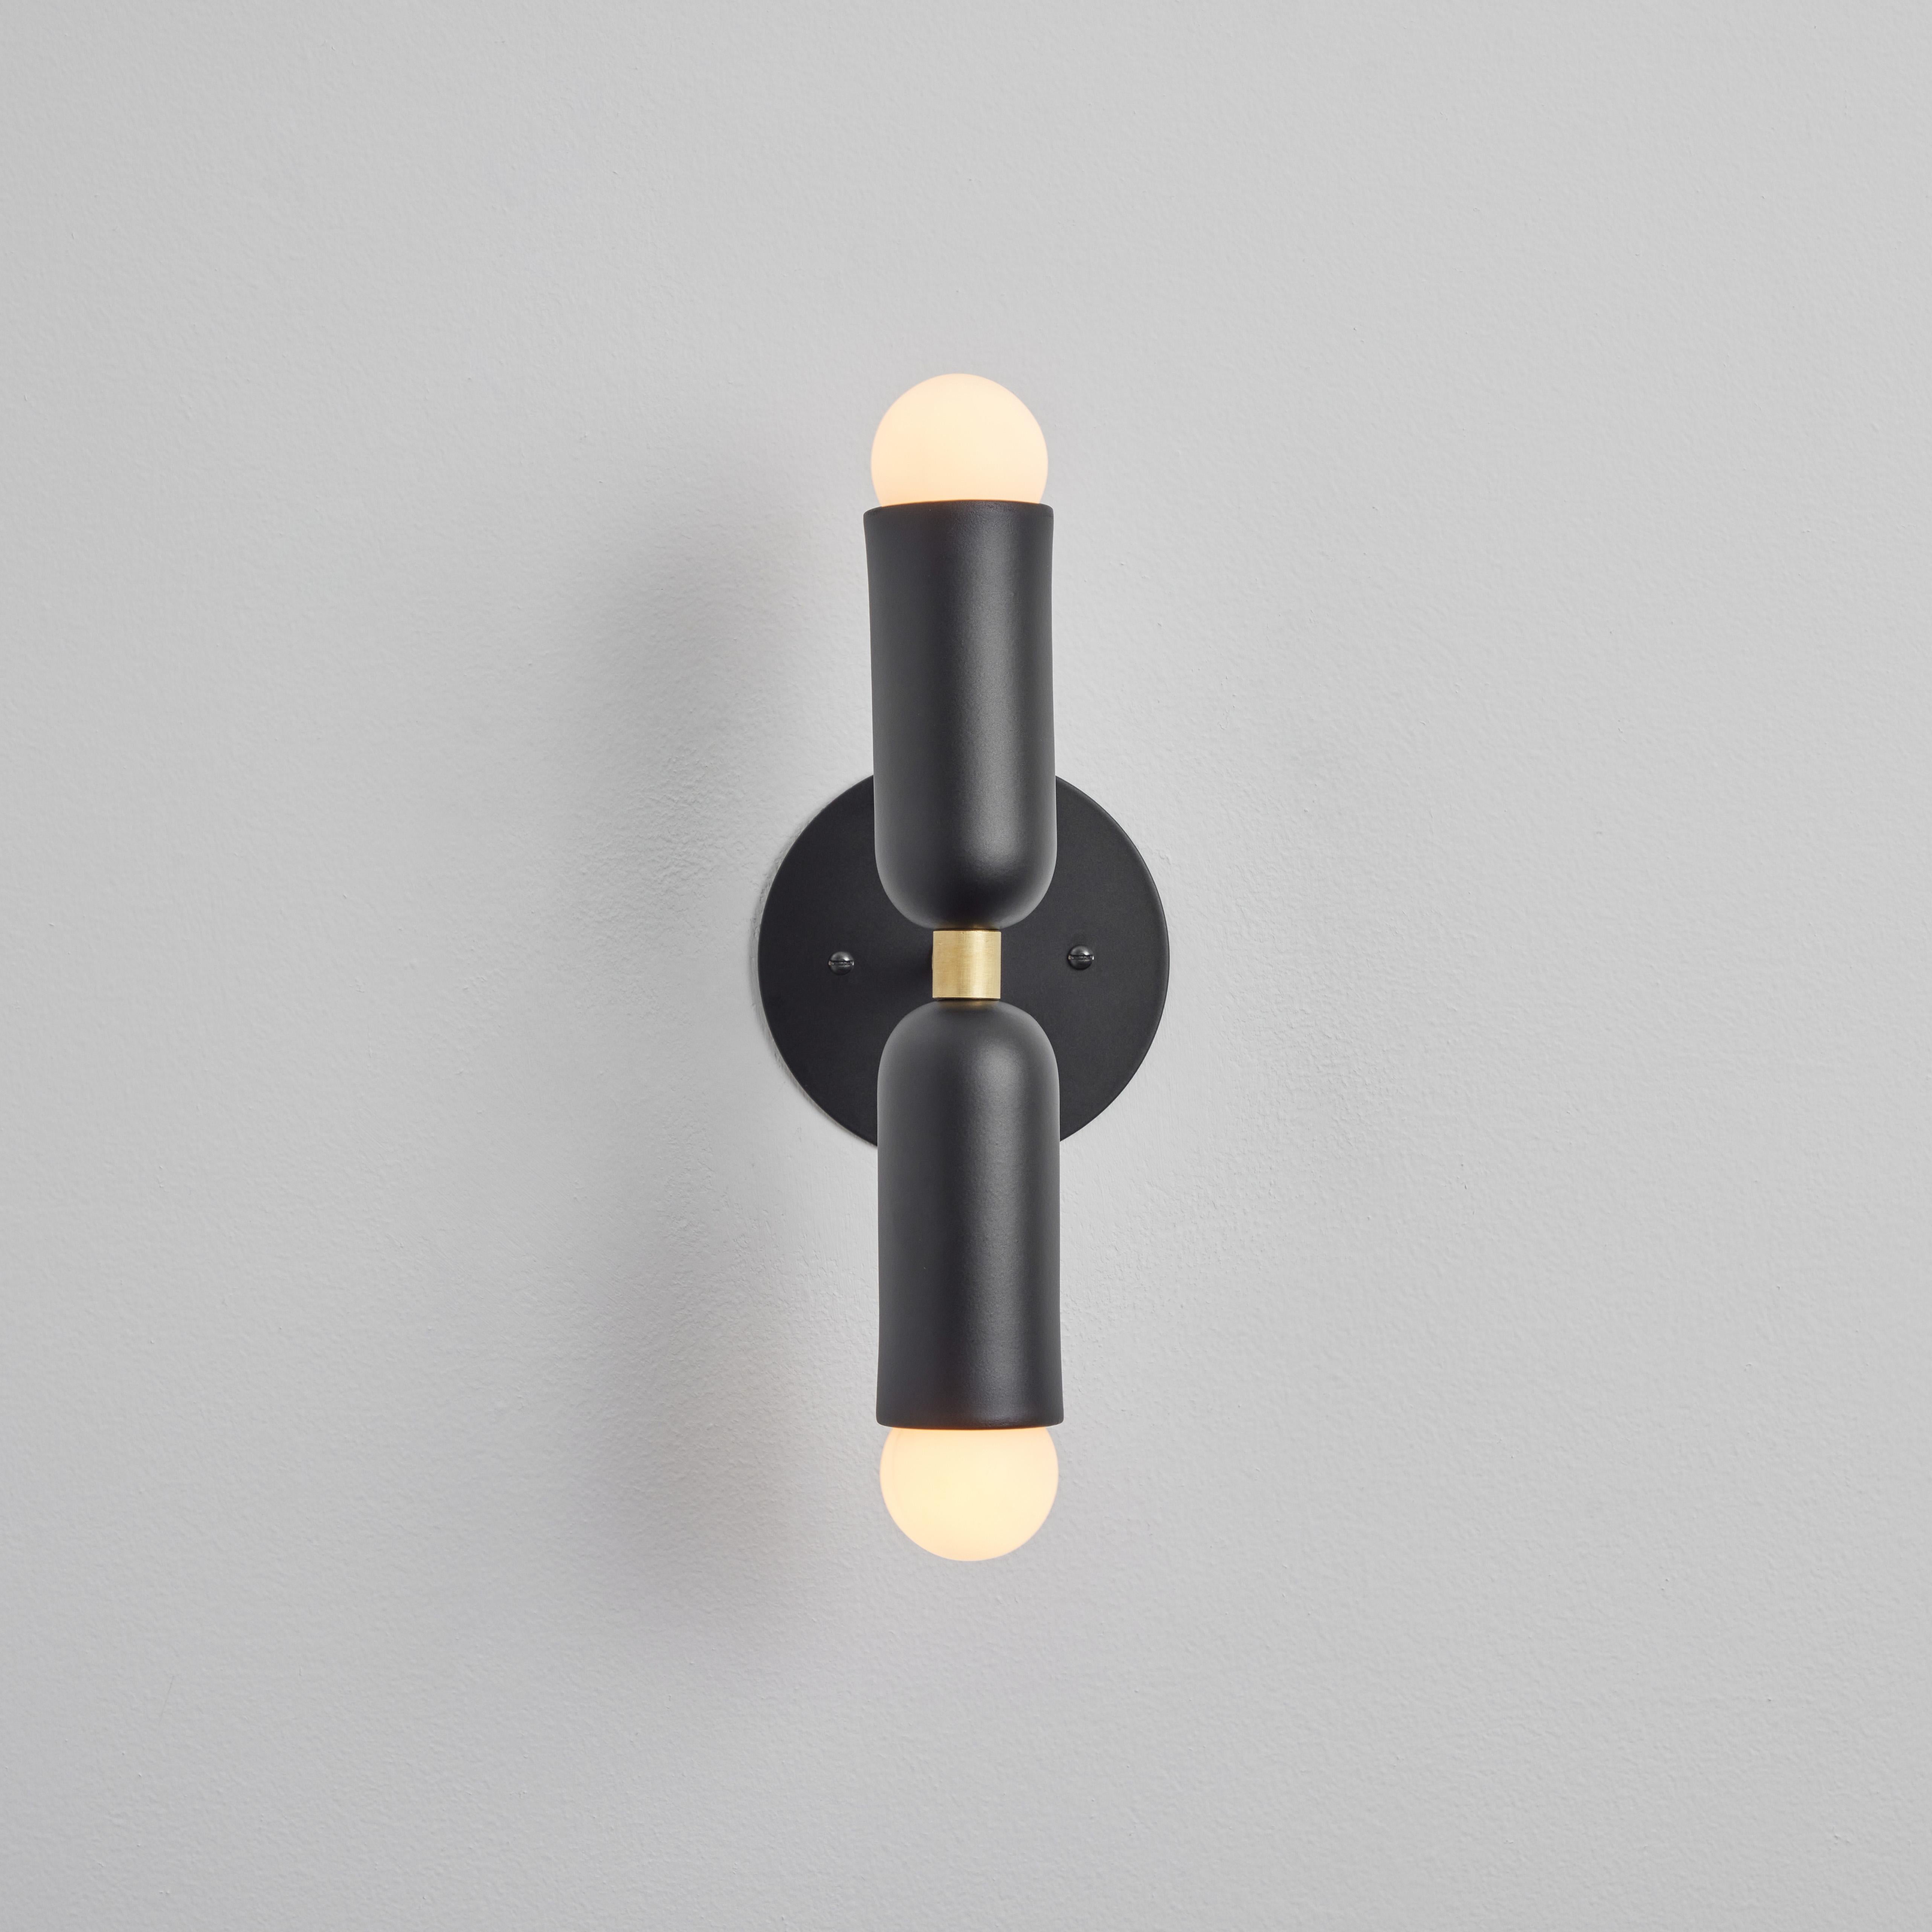 Pair of 'Lulu' sconces in black and brass. 

Hand-fabricated by Los Angeles based designer and lighting professional Alvaro Benitez, these highly refined sconces are reminiscent of the iconic midcentury Italian designs of Arteluce and Stilnovo.